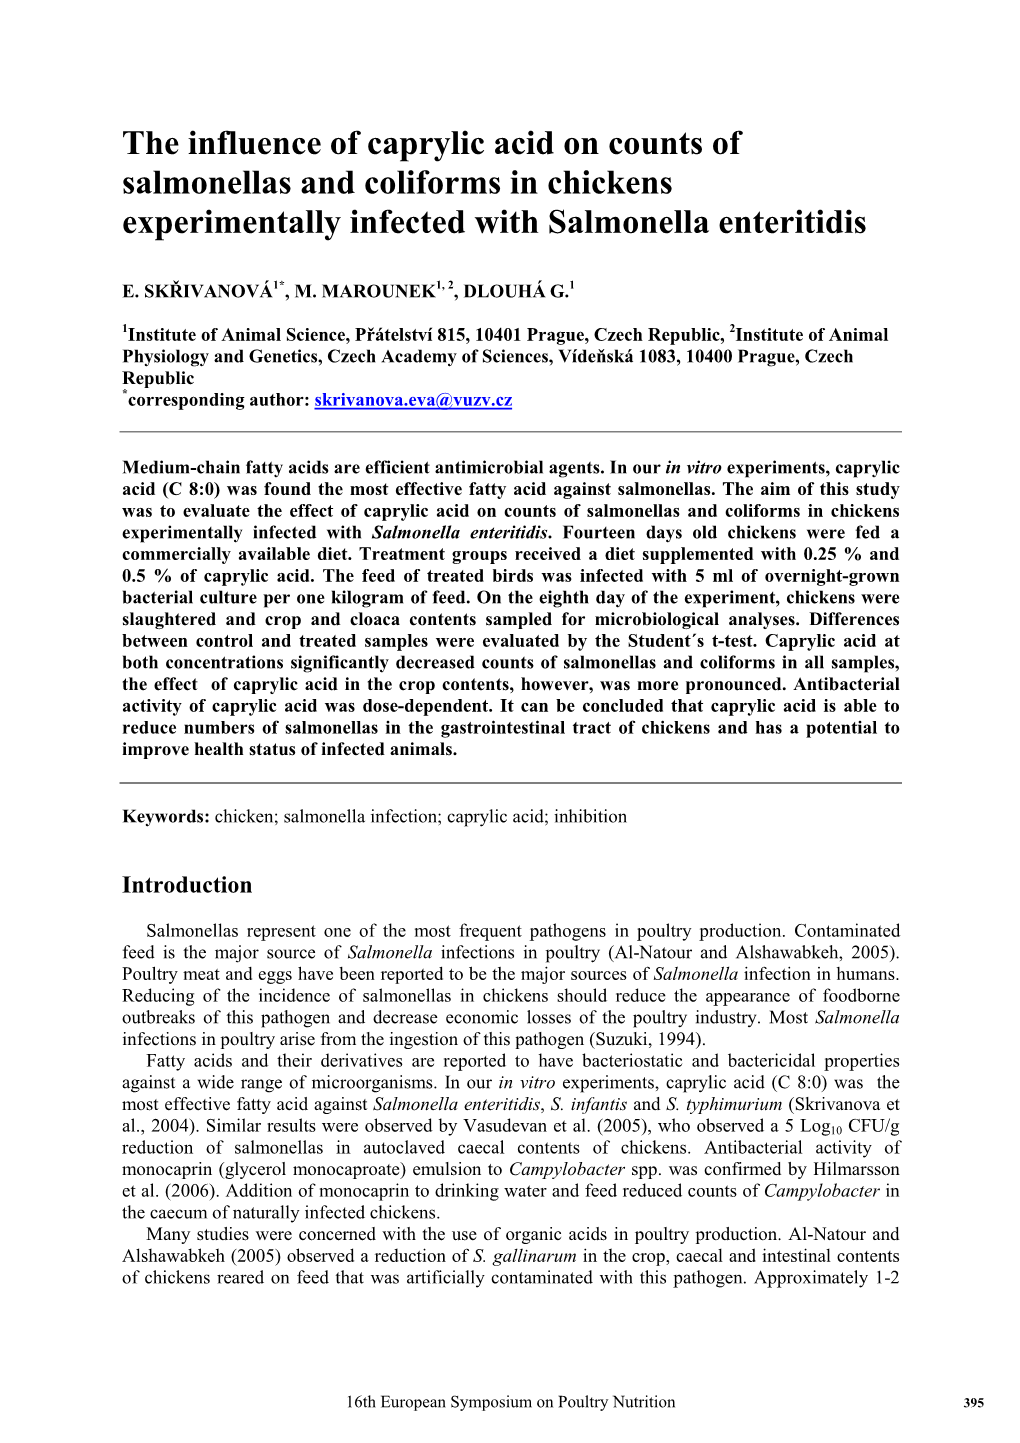 The Influence of Caprylic Acid on Counts of Salmonellas and Coliforms in Chickens Experimentally Infected with Salmonella Enteritidis